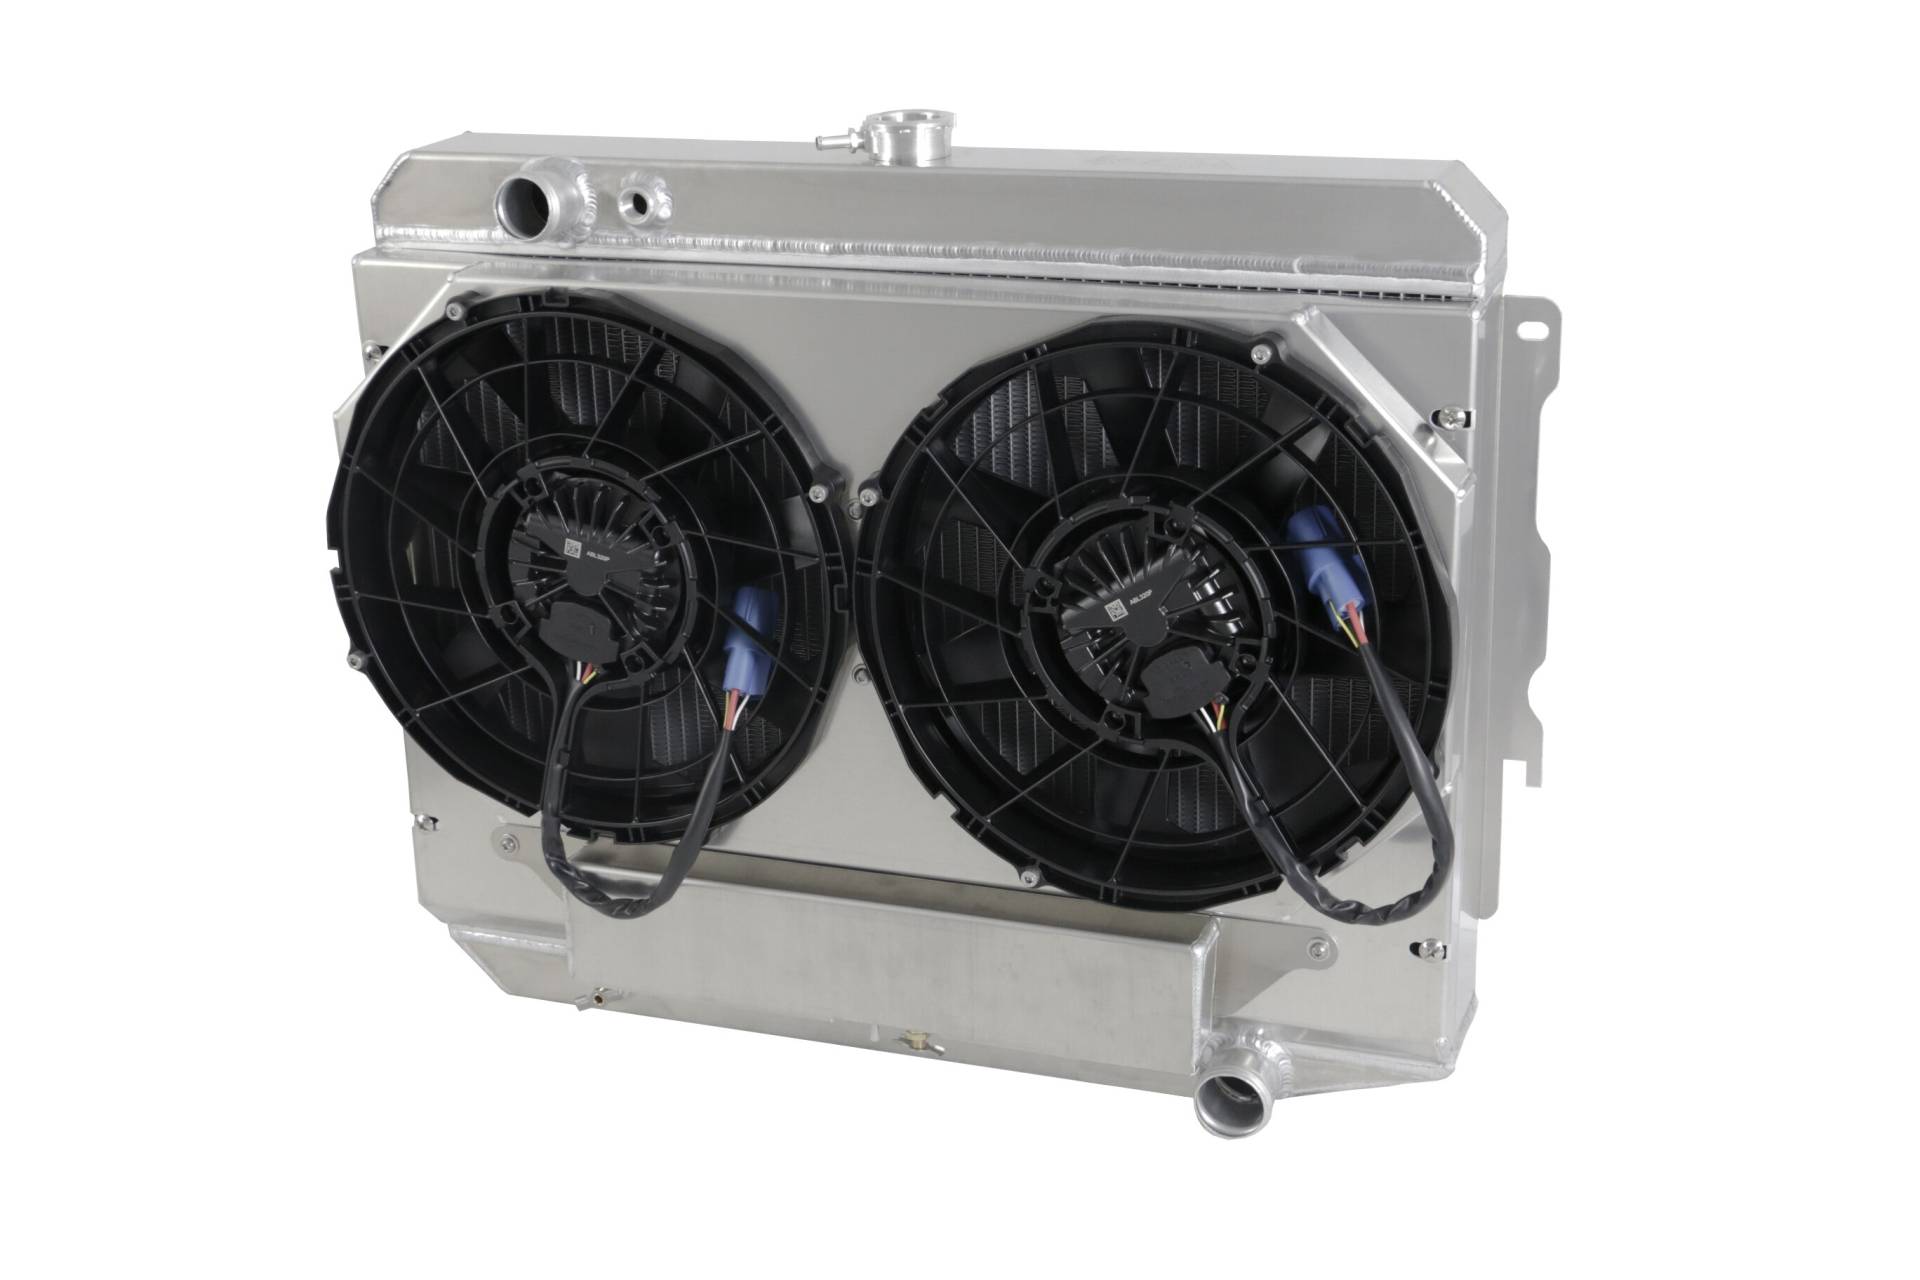 Wizard Cooling Inc - Wizard Cooling - 1970-1973 26" S/B Mopar Applications Aluminum Radiator (w/ Brushless Fan, Shroud, And Expansion Tank) - 374-202BLX